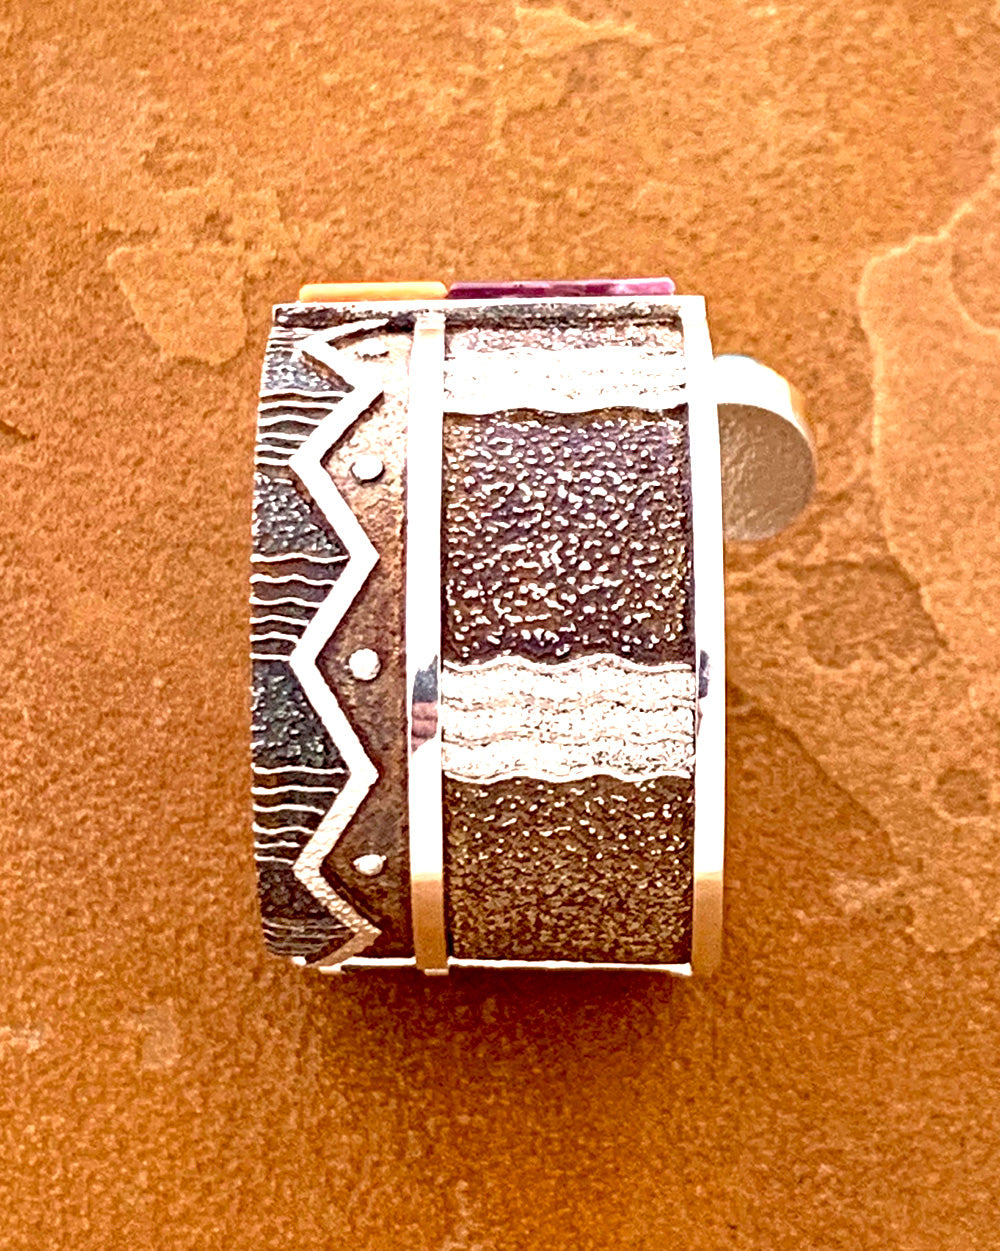 SOLD  Ric Charlie Sterling Silver Tufa Cast Inlaid Cuff Bracelet with Turquoise Gold